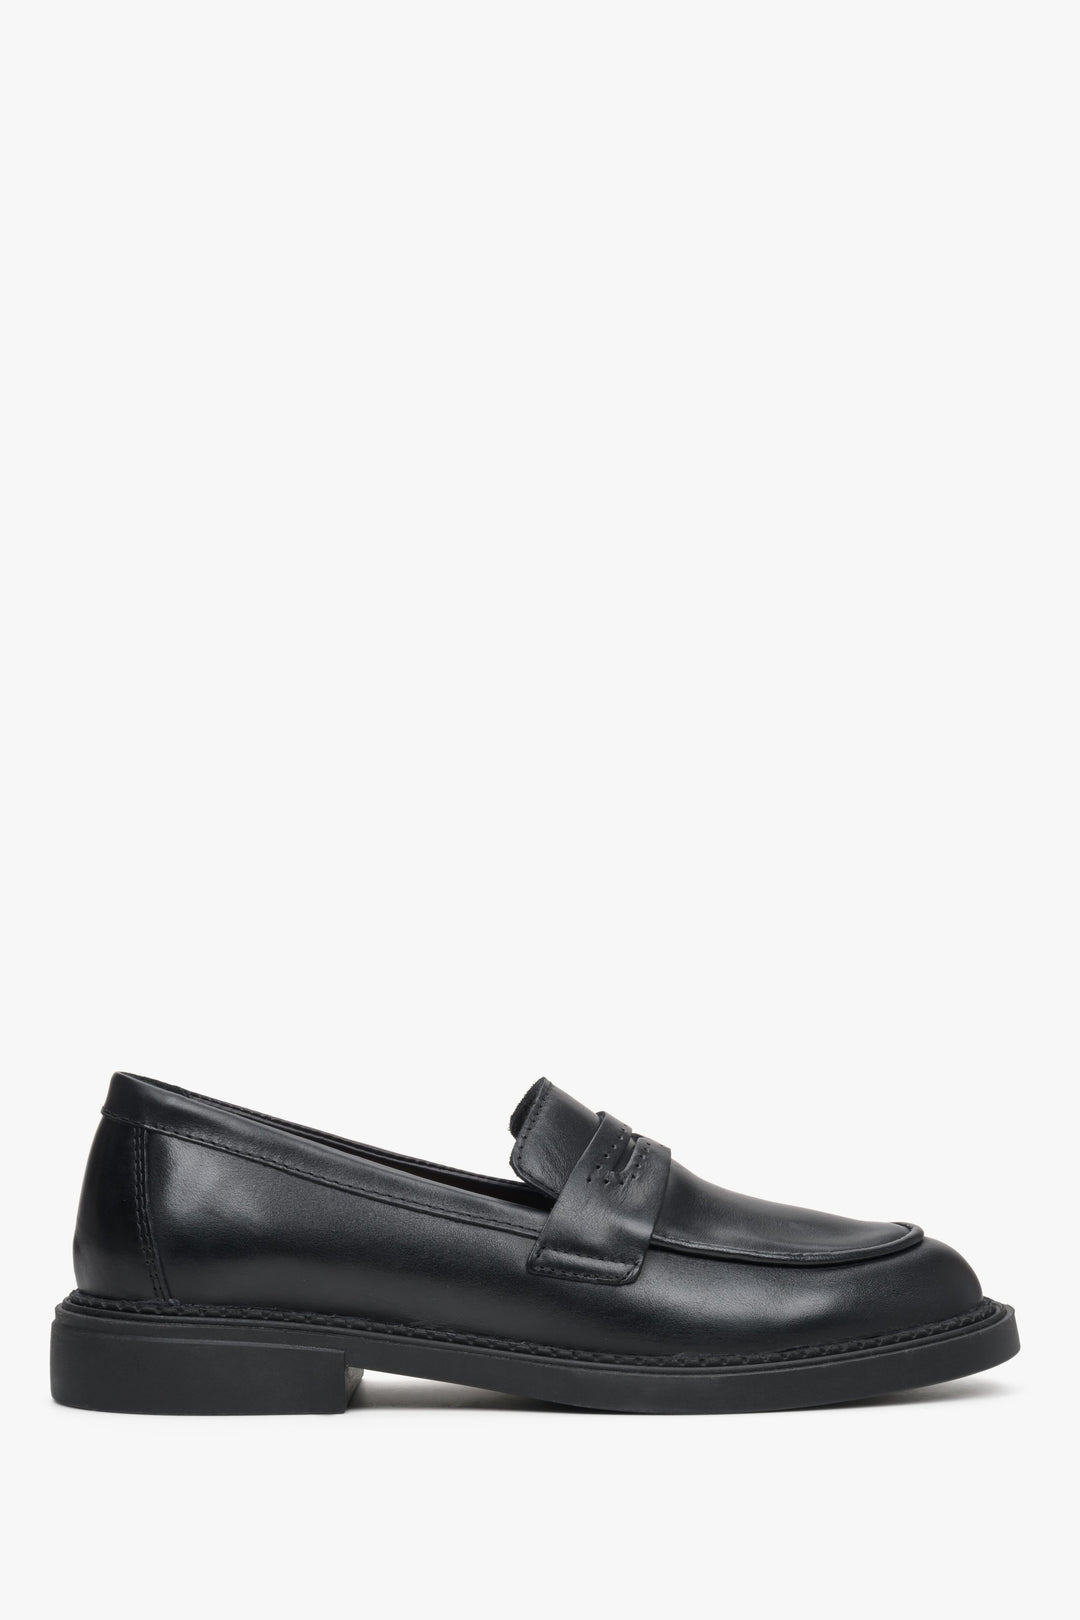 Elegant women's black loafers for fall by Estro.